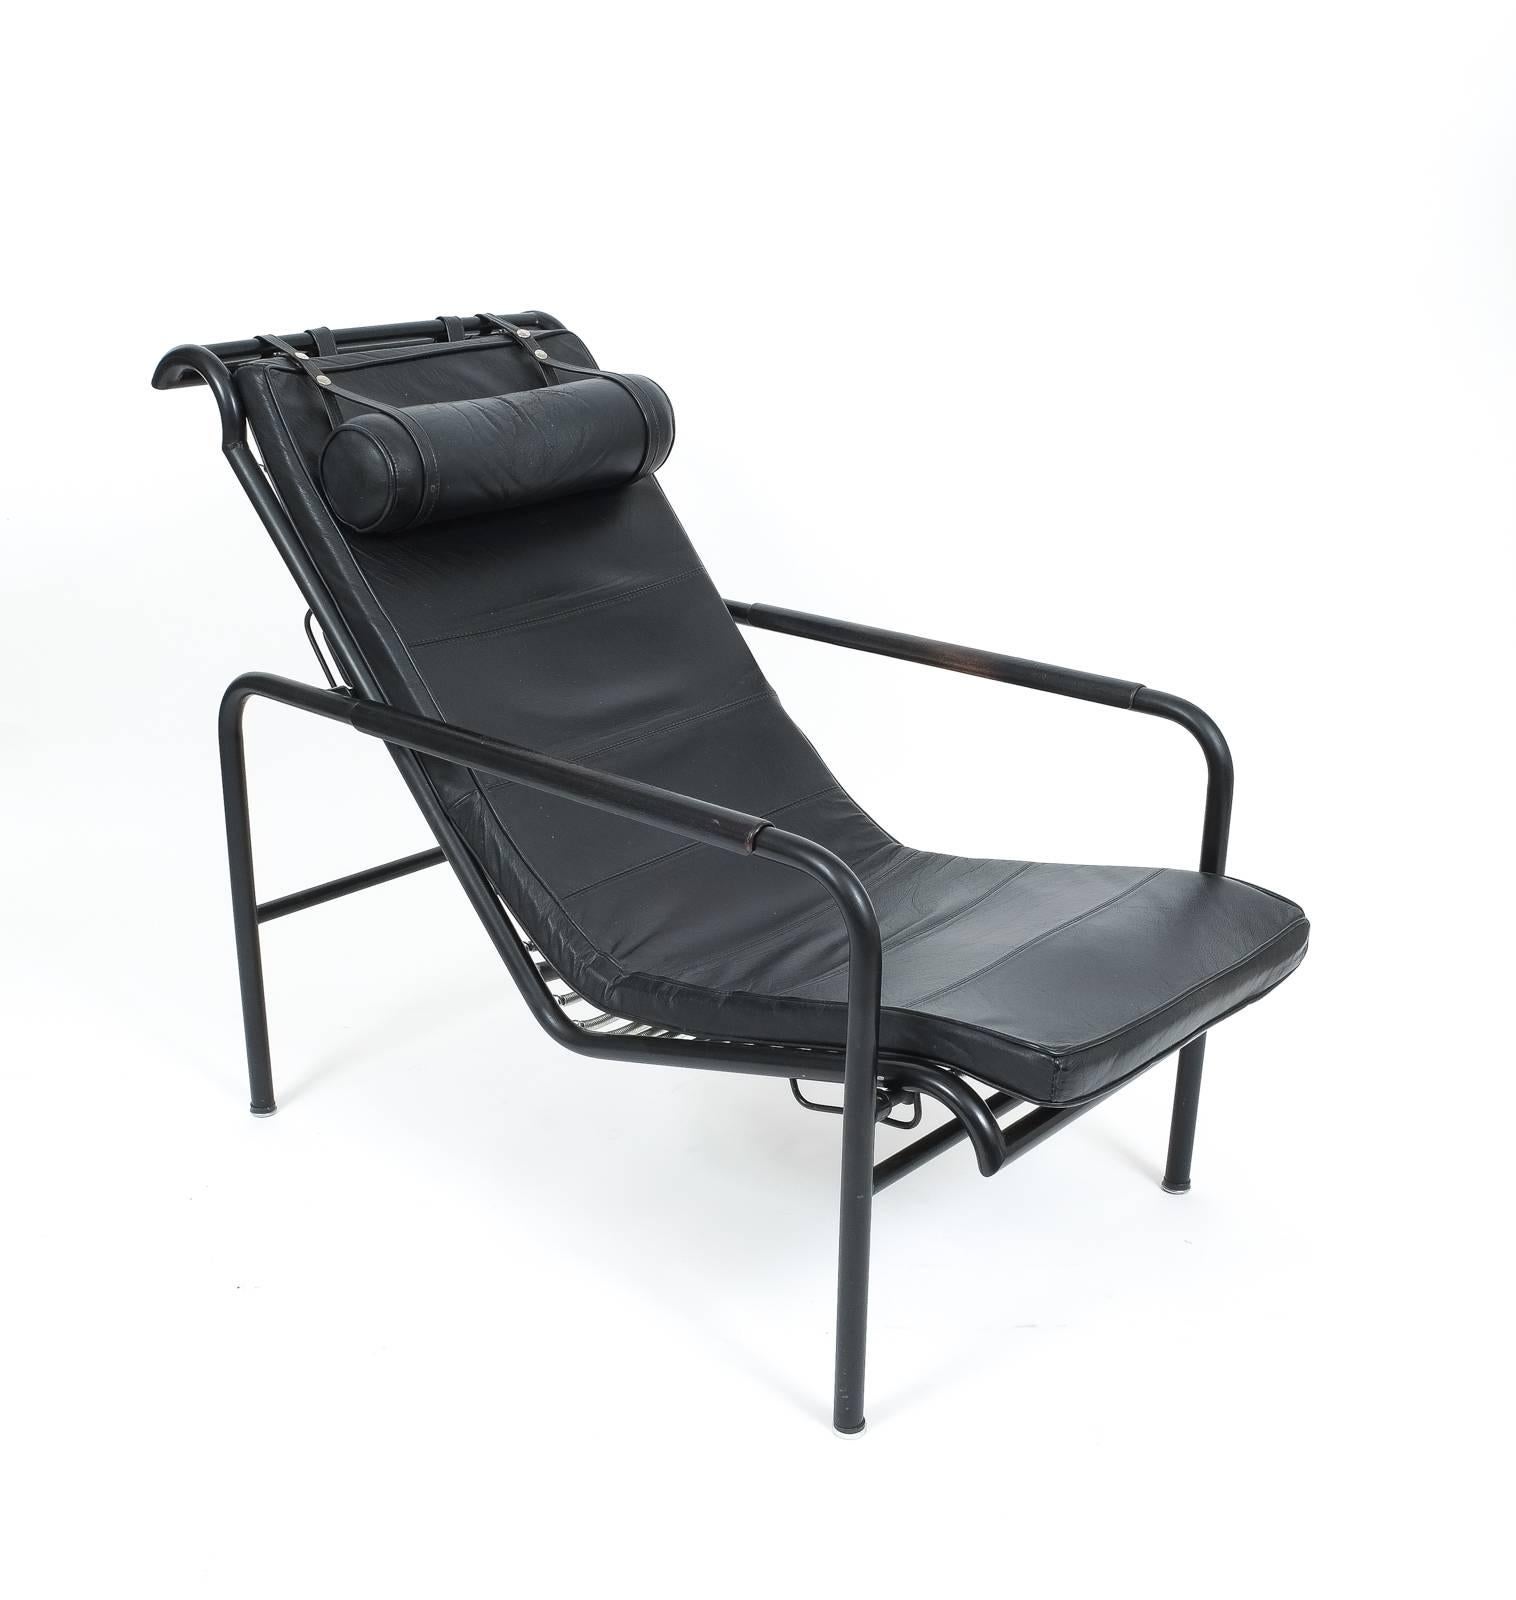 Dyed Black Leather Genni Chaise by Gabriele Mucchi for Zanotta